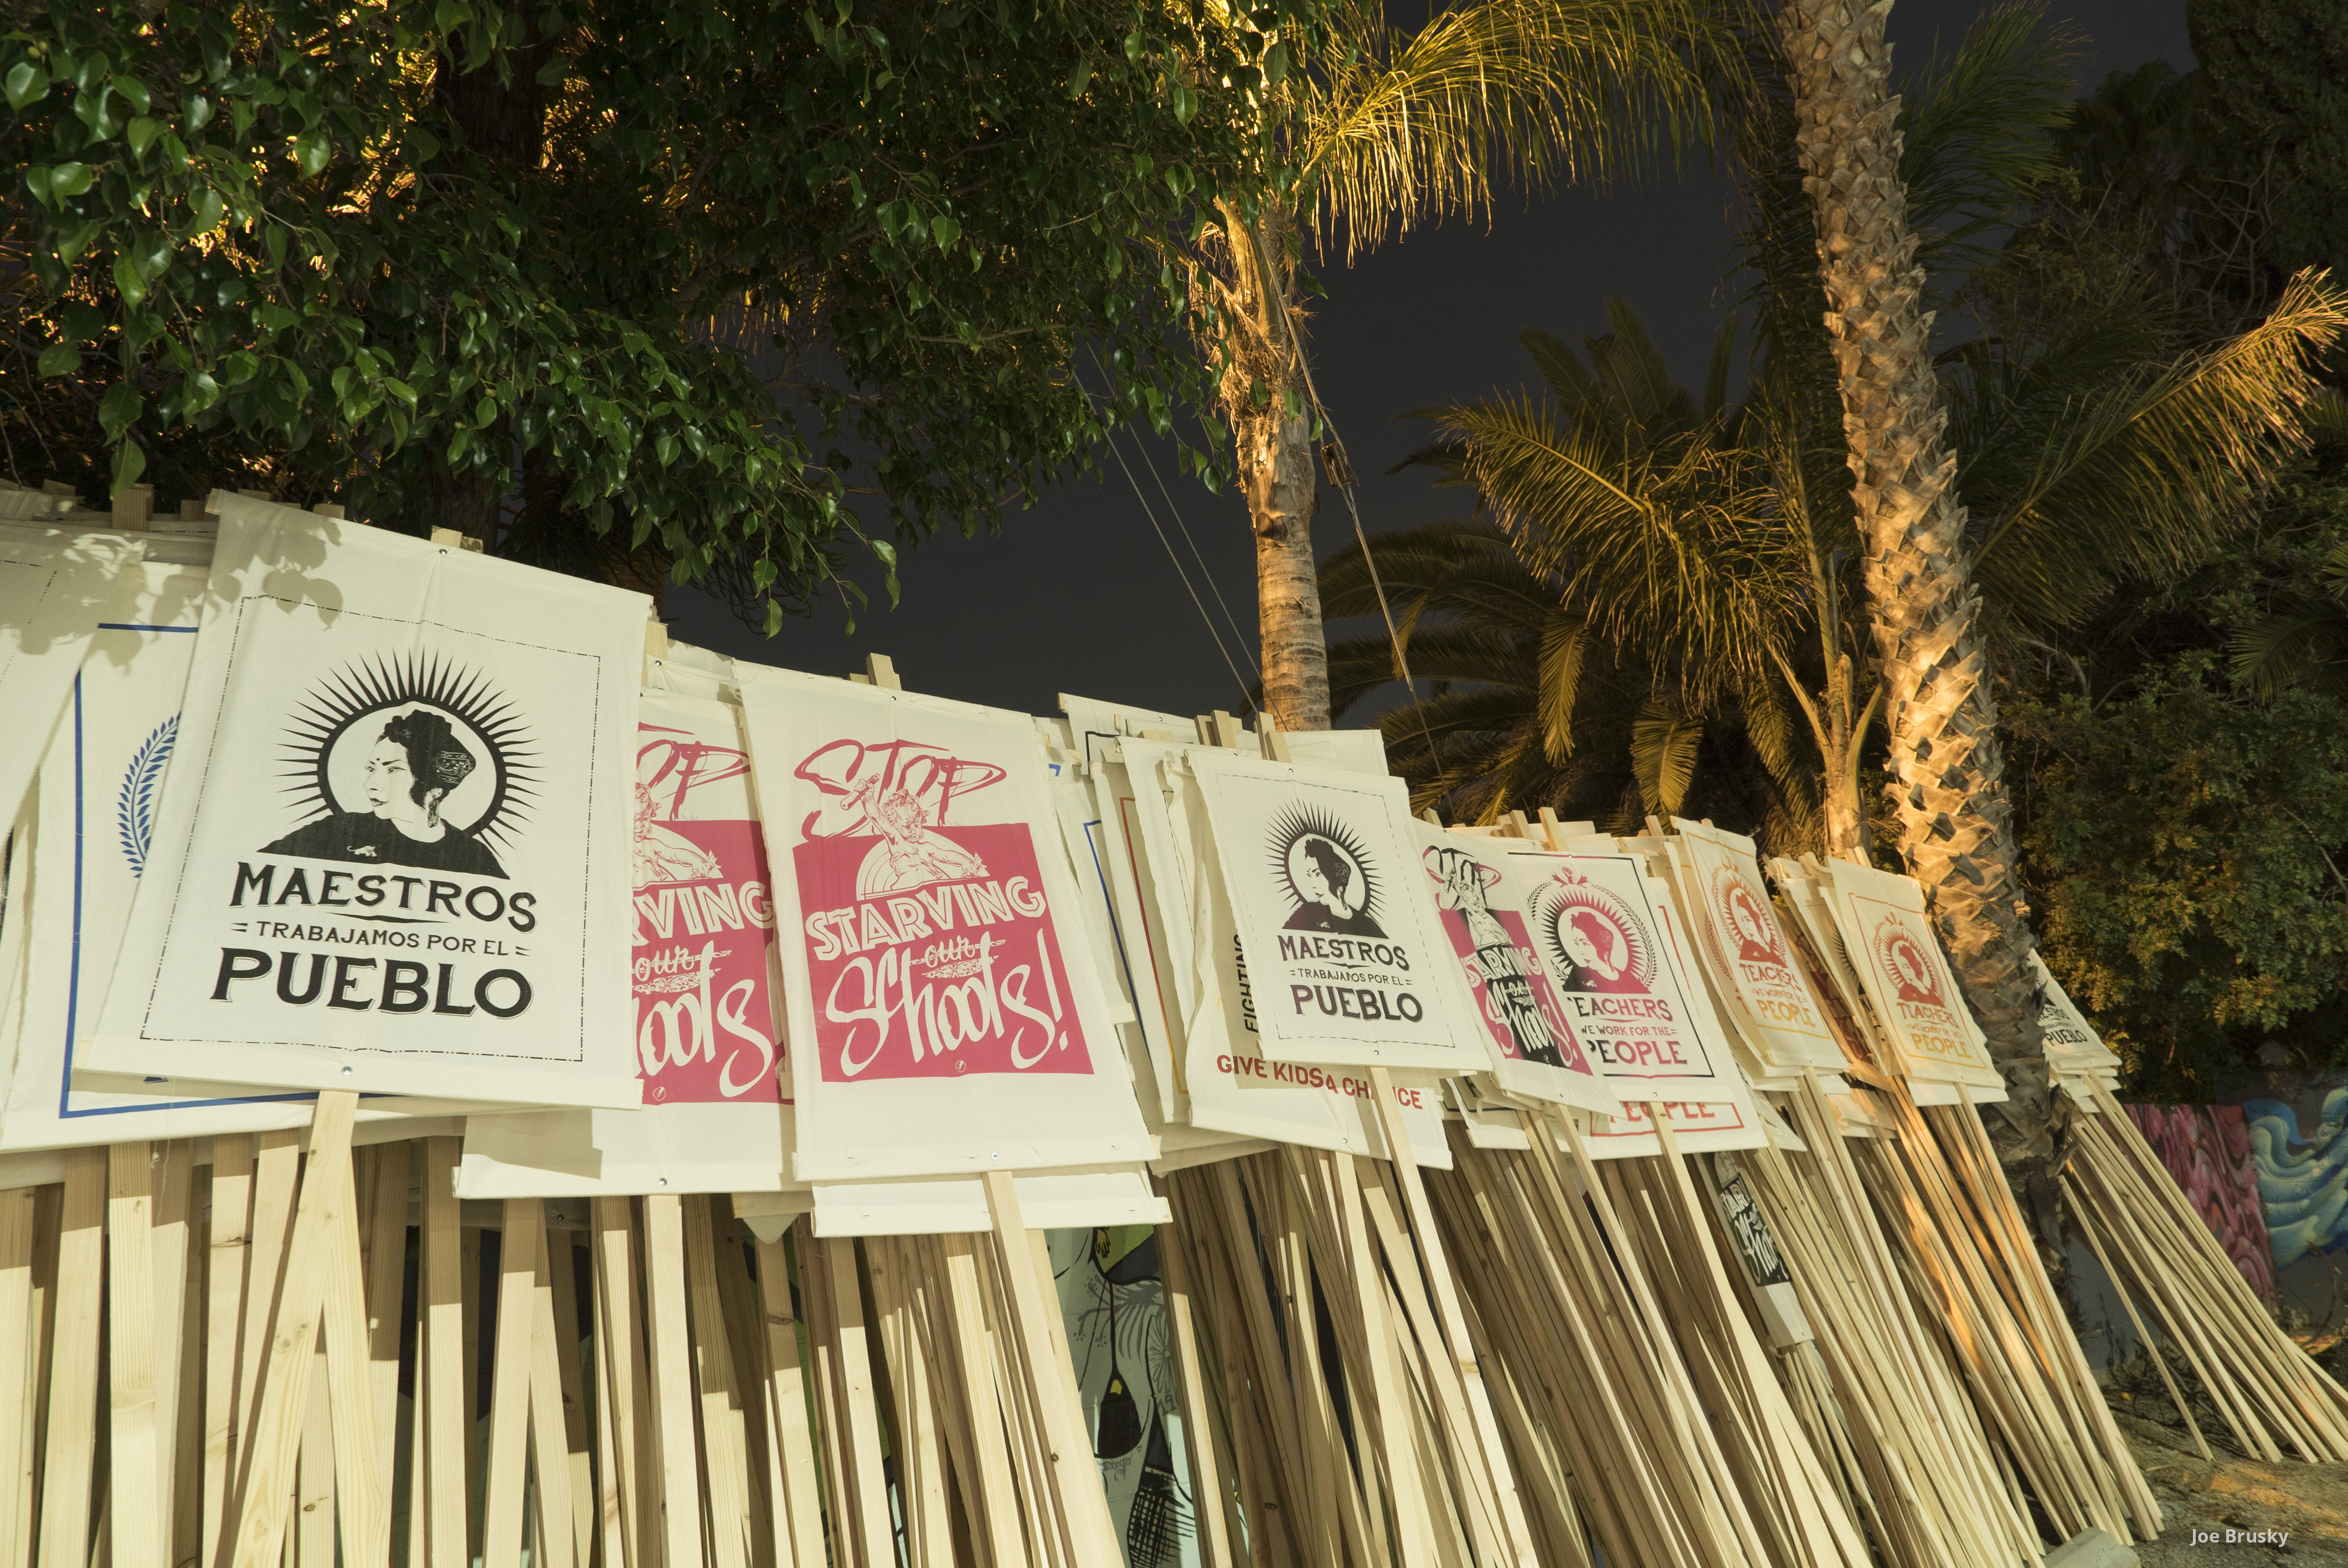 A stack of dozens of picket signs are propped up underneath a canopy of palm trees. The signs are screen printed with the slogans, “Stop starving our schools” and “Maestros Pueblos.” 